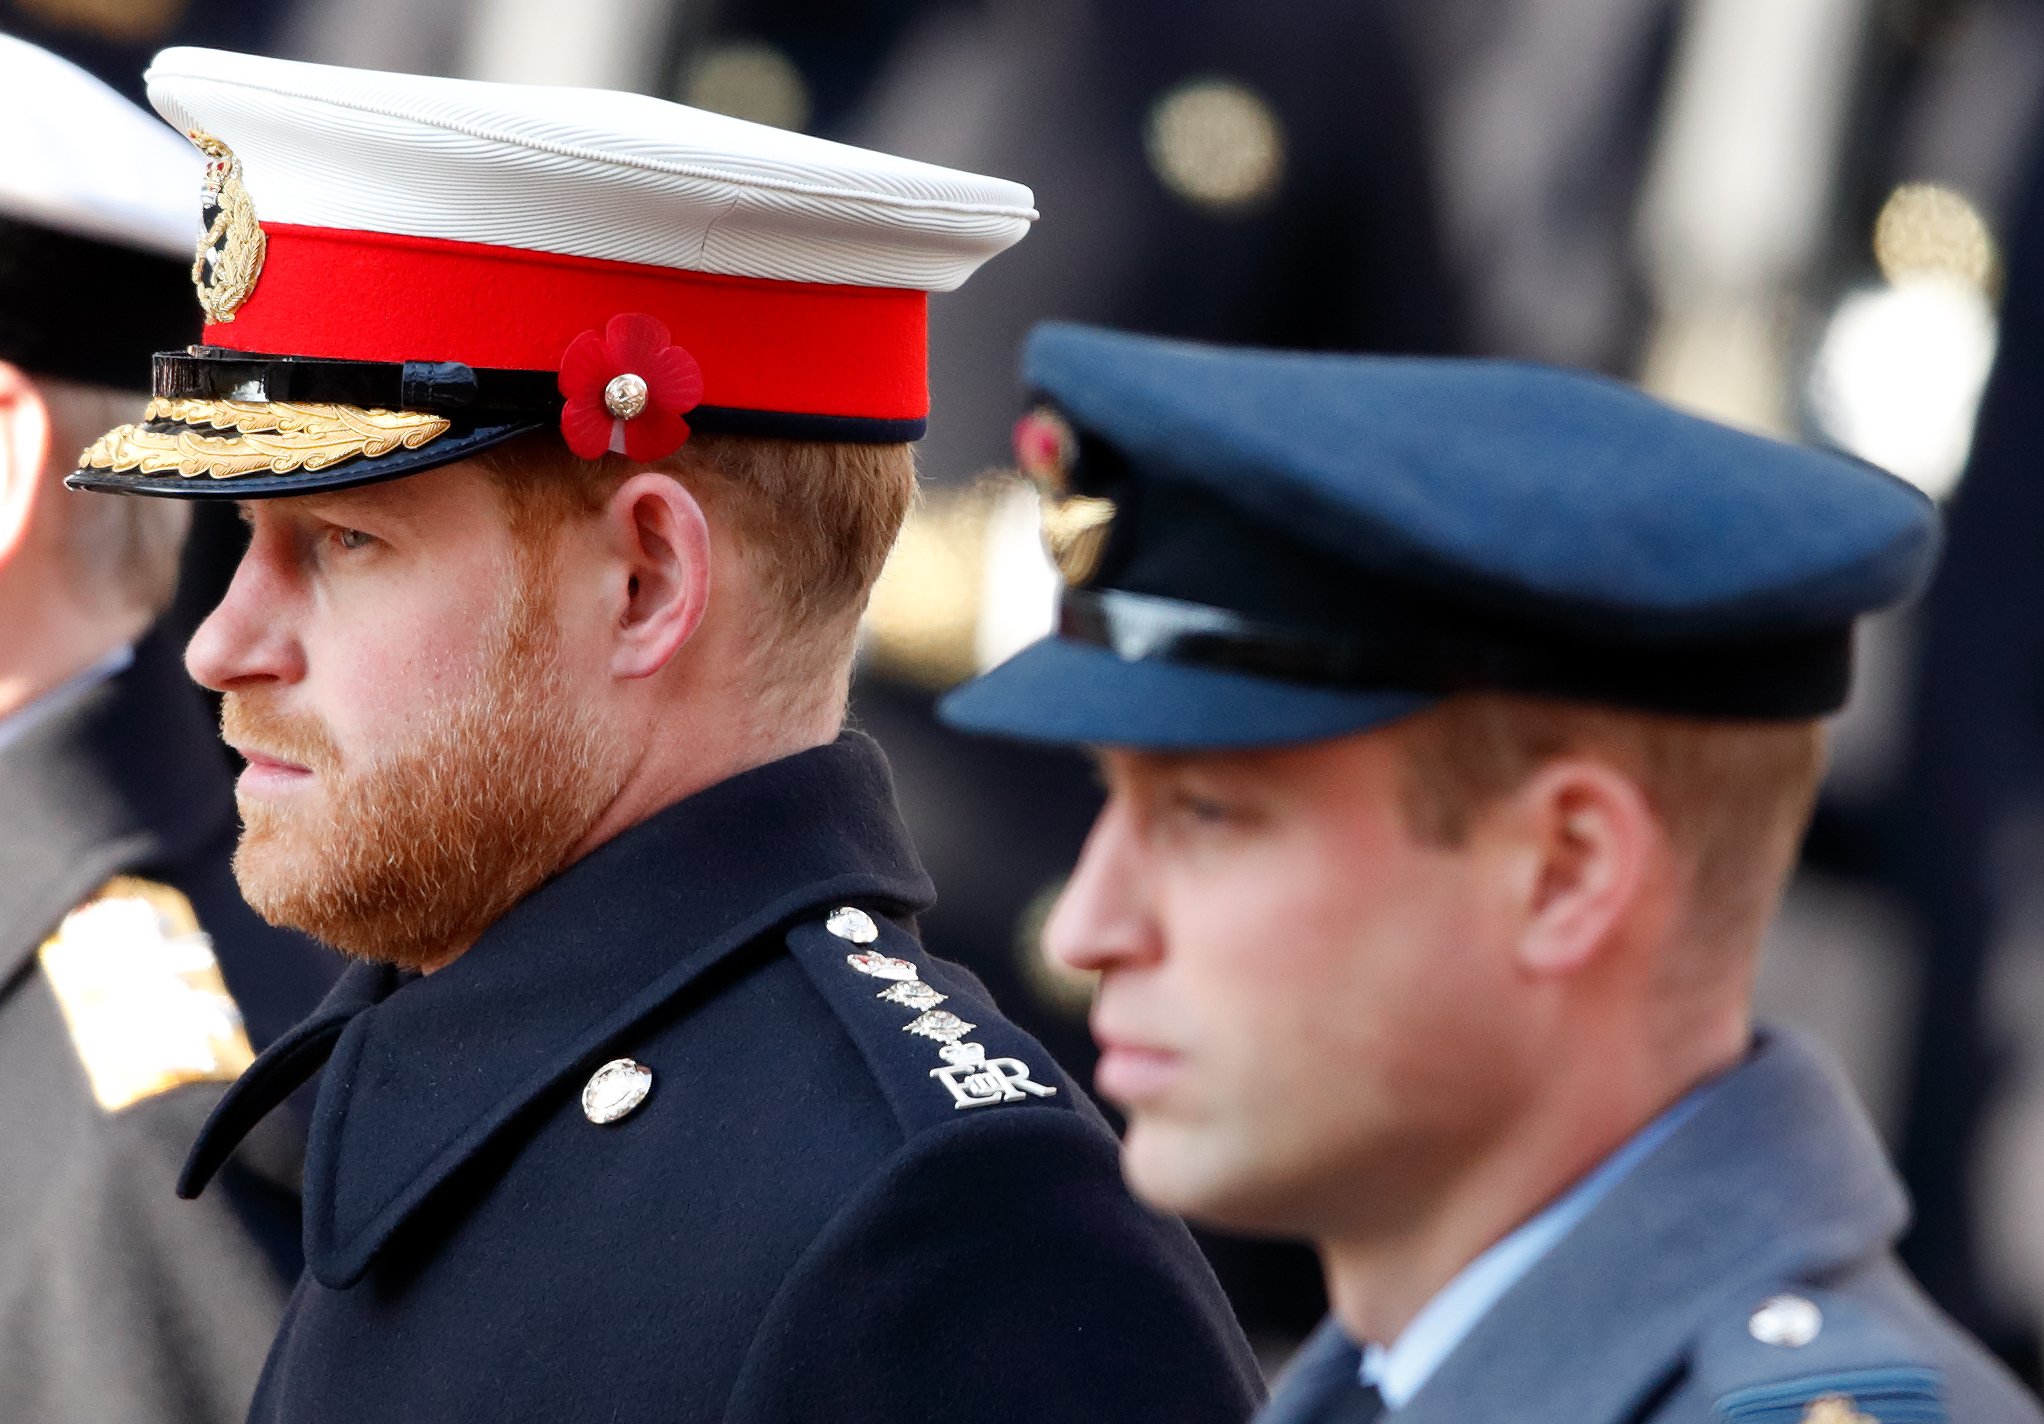 Prince Harry and Prince William attend the Remembrance Sunday service in London, England on November 10, 2019. | Photo: Getty Images